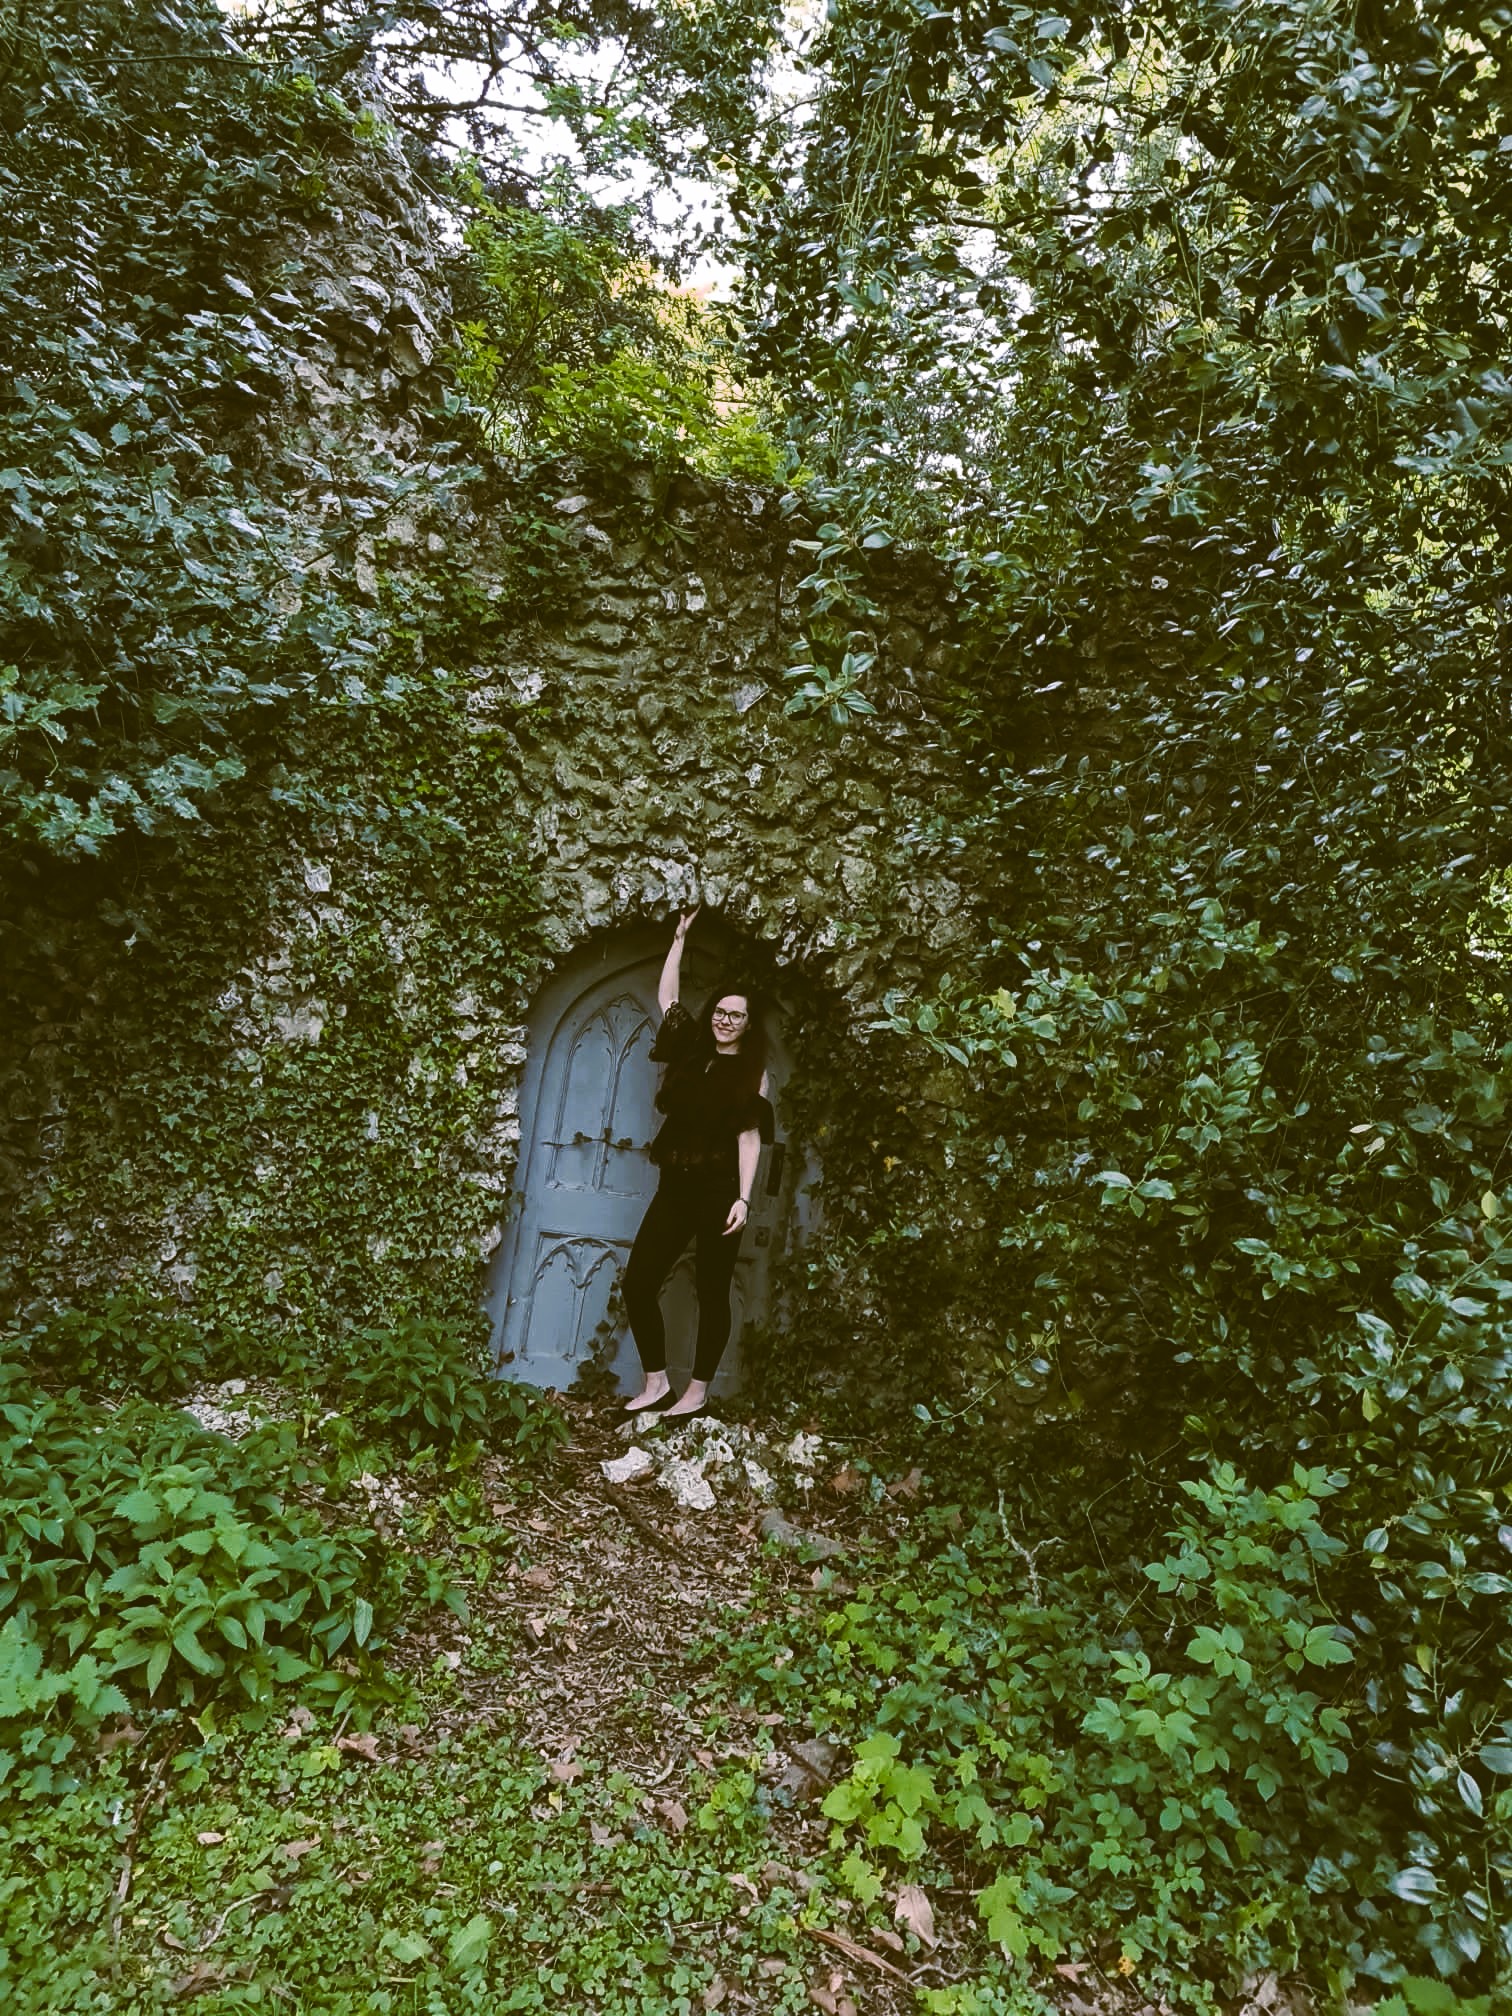 A fairy door with Wandering Lewis posing in front of it. Somewhere in Hampshire, England